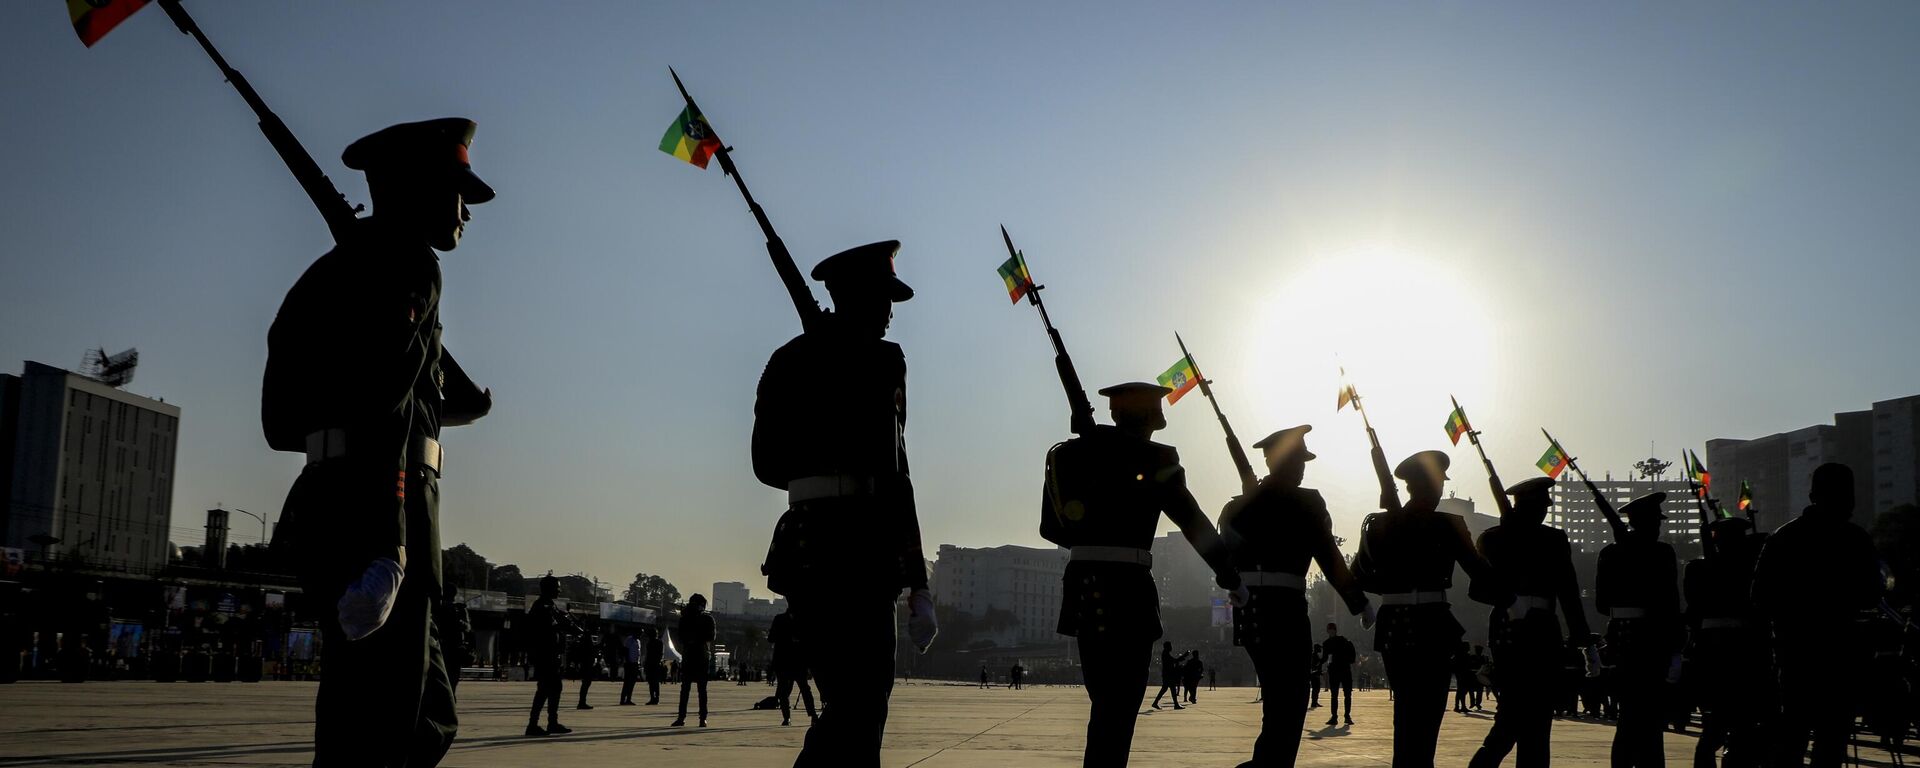 Ethiopian military parade with national flags attached to their rifles at a rally organized by local authorities to show support for the Ethiopian National Defense Force (ENDF), at Meskel square in downtown Addis Ababa, Ethiopia on Nov. 7, 2021. - Sputnik International, 1920, 11.01.2023